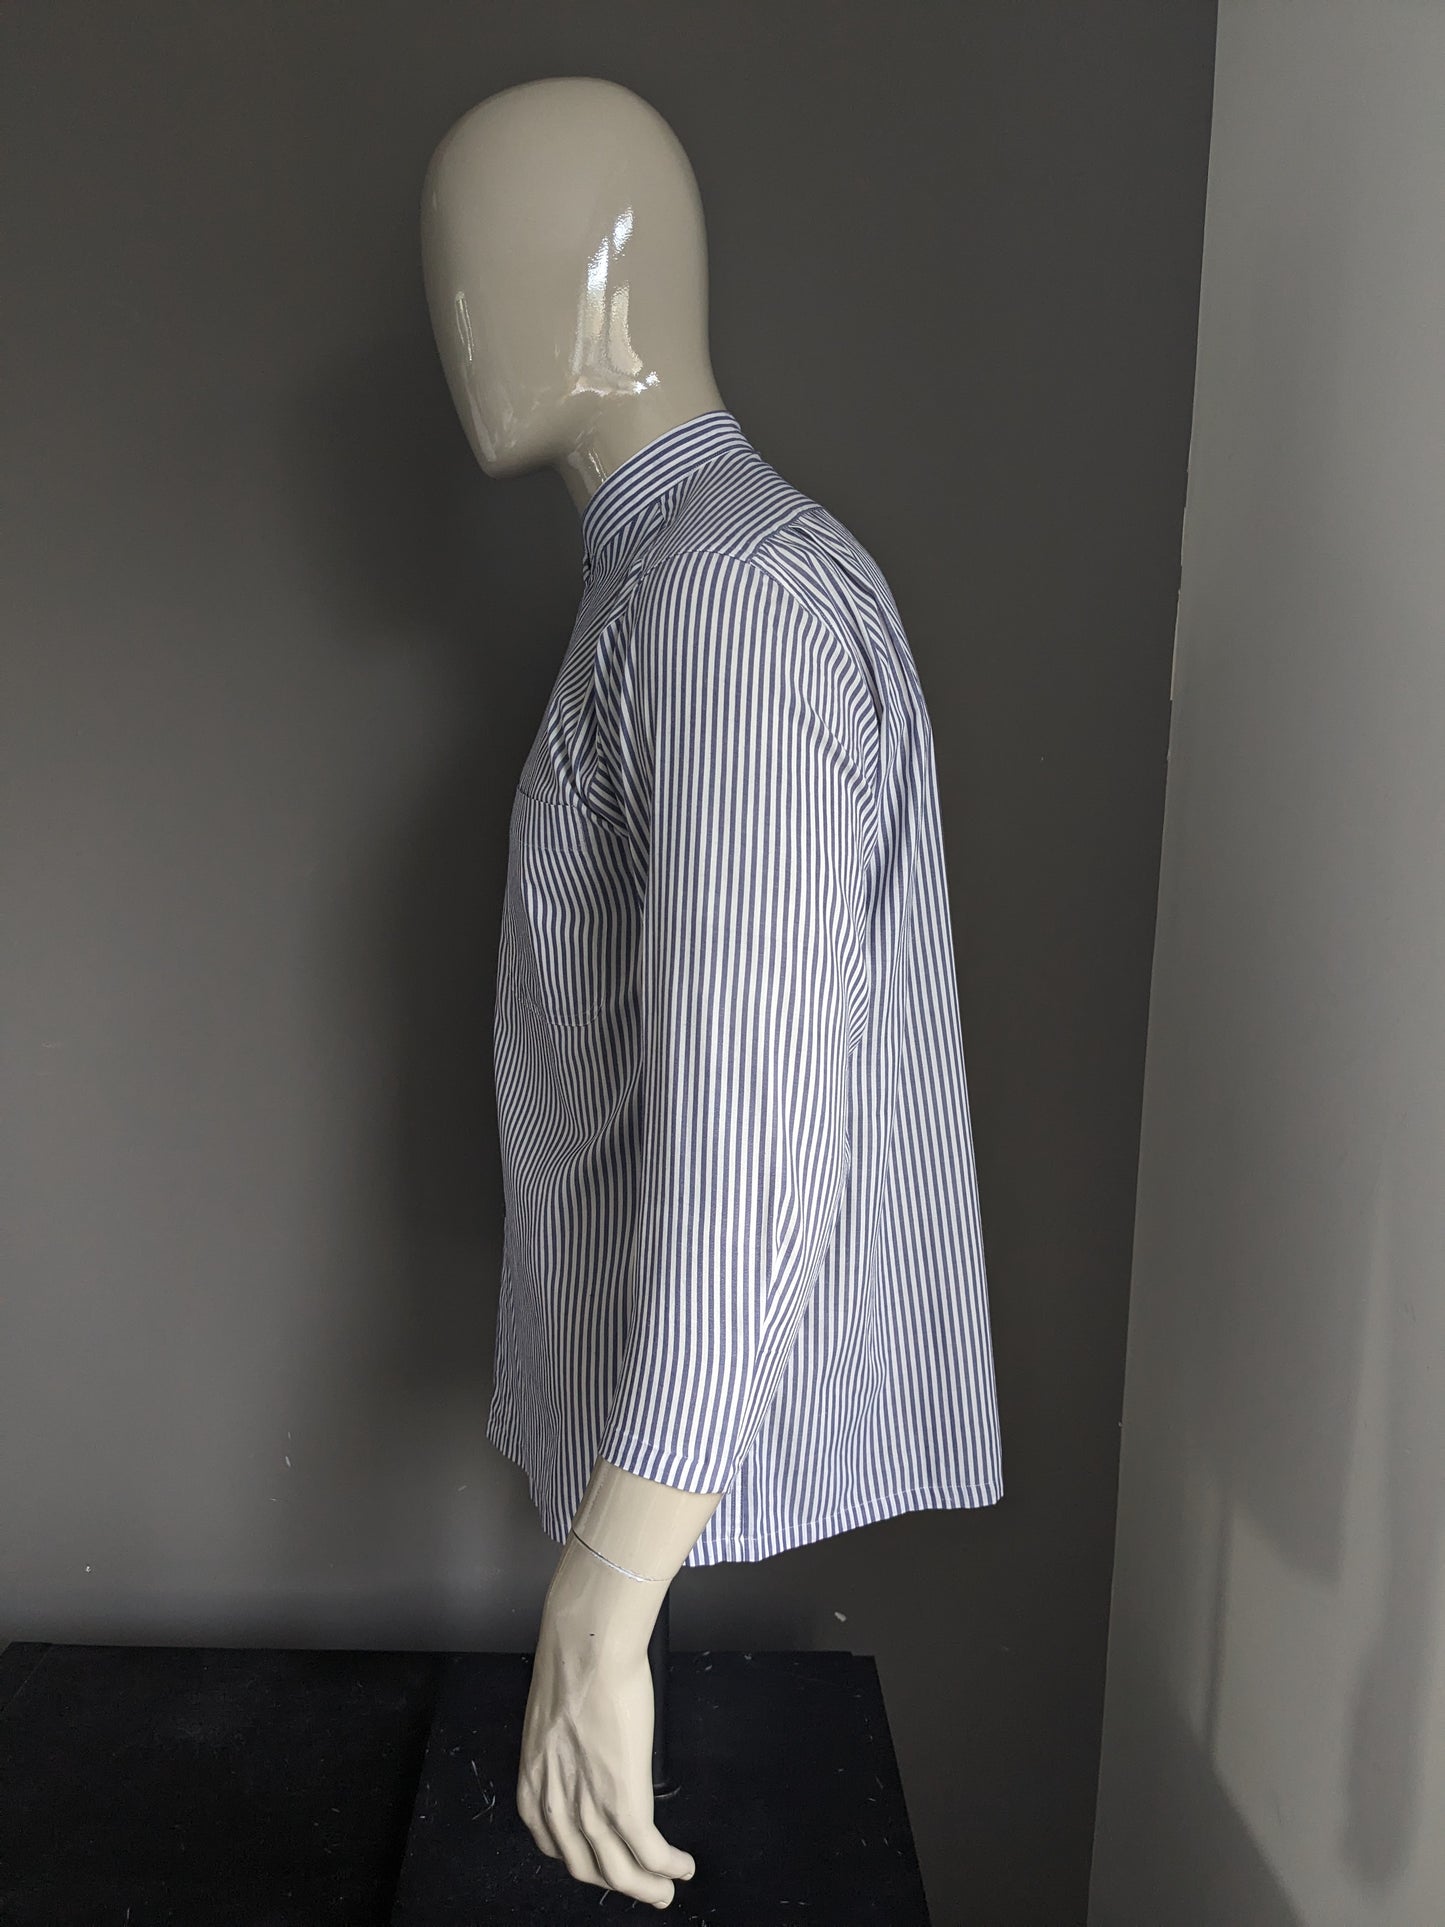 Vintage Kings Pride shirt with Mao / Farmers / Standing Collar. Blue white striped. Size L.